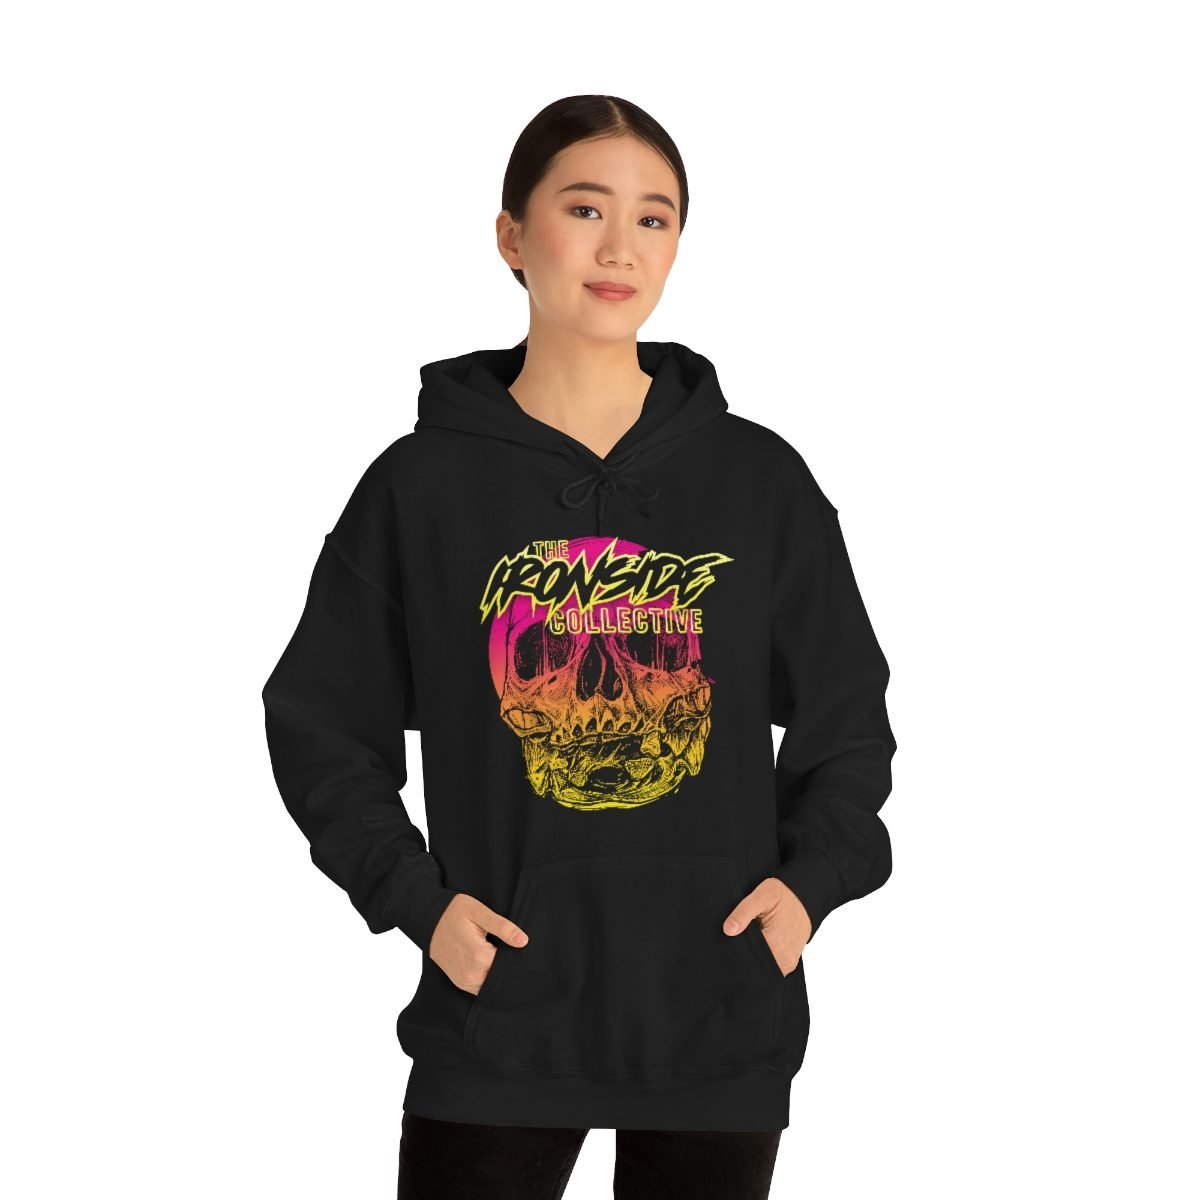 The Ironside Collective (The Charon Collective) Pullover Hooded Sweatshirt 18500